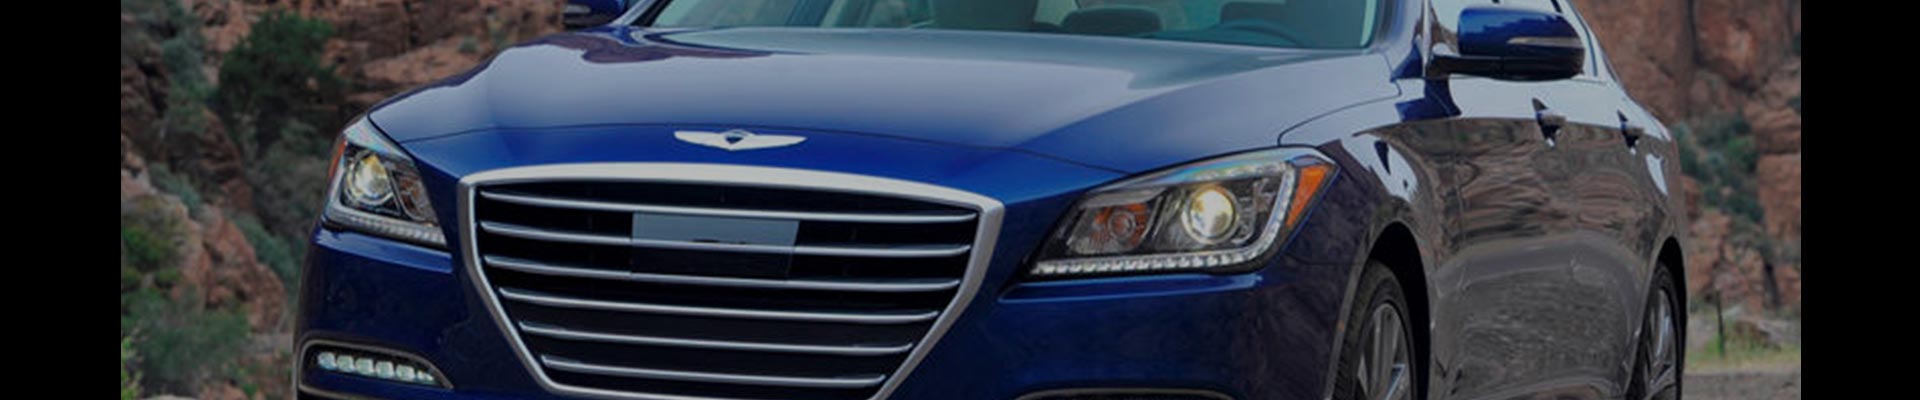 Shop Replacement and OEM 2009 Hyundai Genesis Parts with Discounted Price on the Net